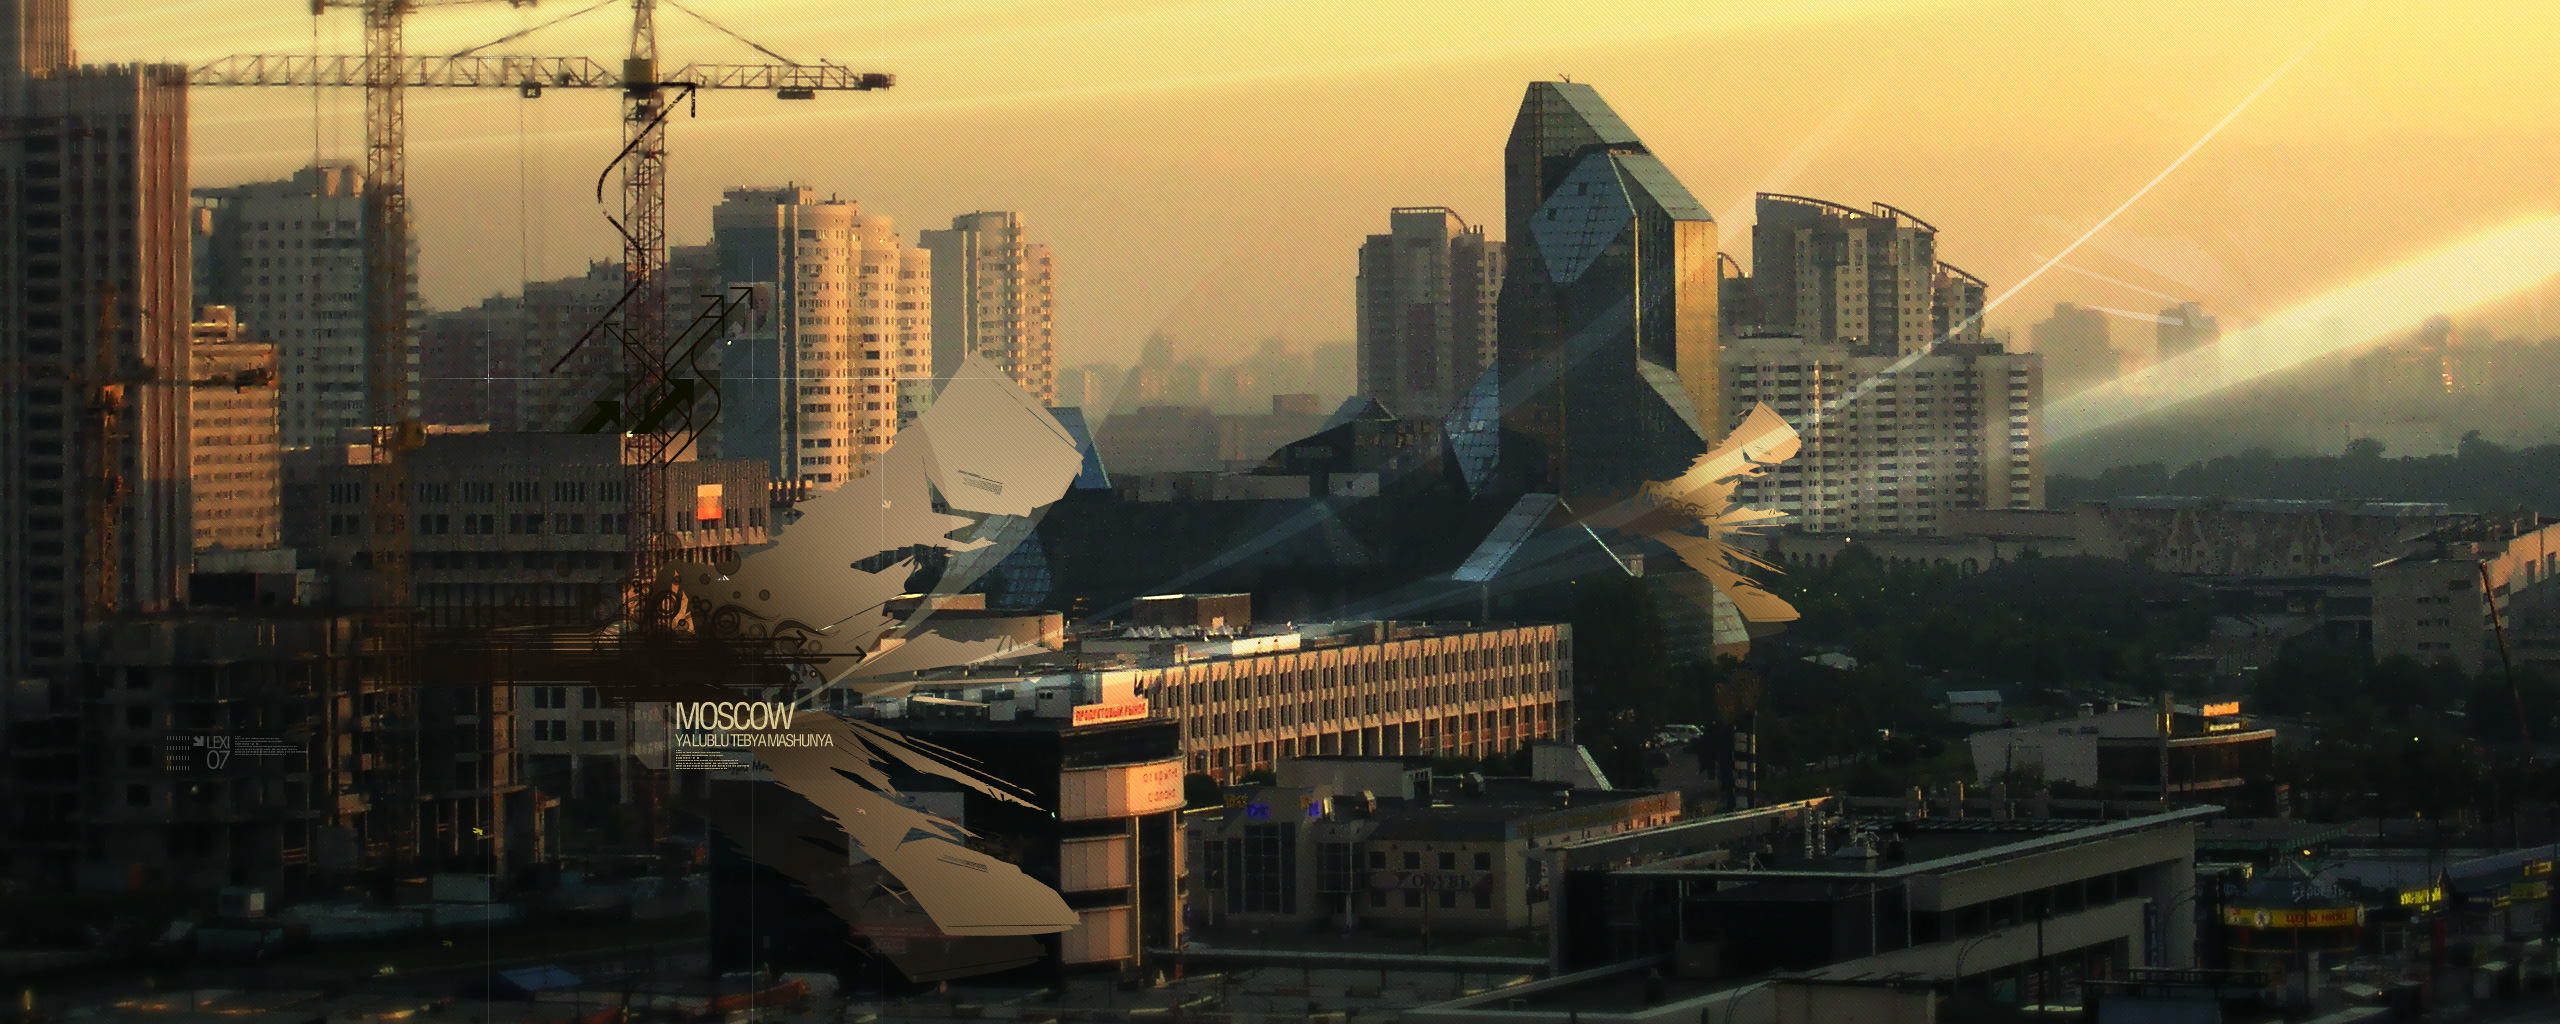 Man Made Moscow HD Wallpaper | Background Image